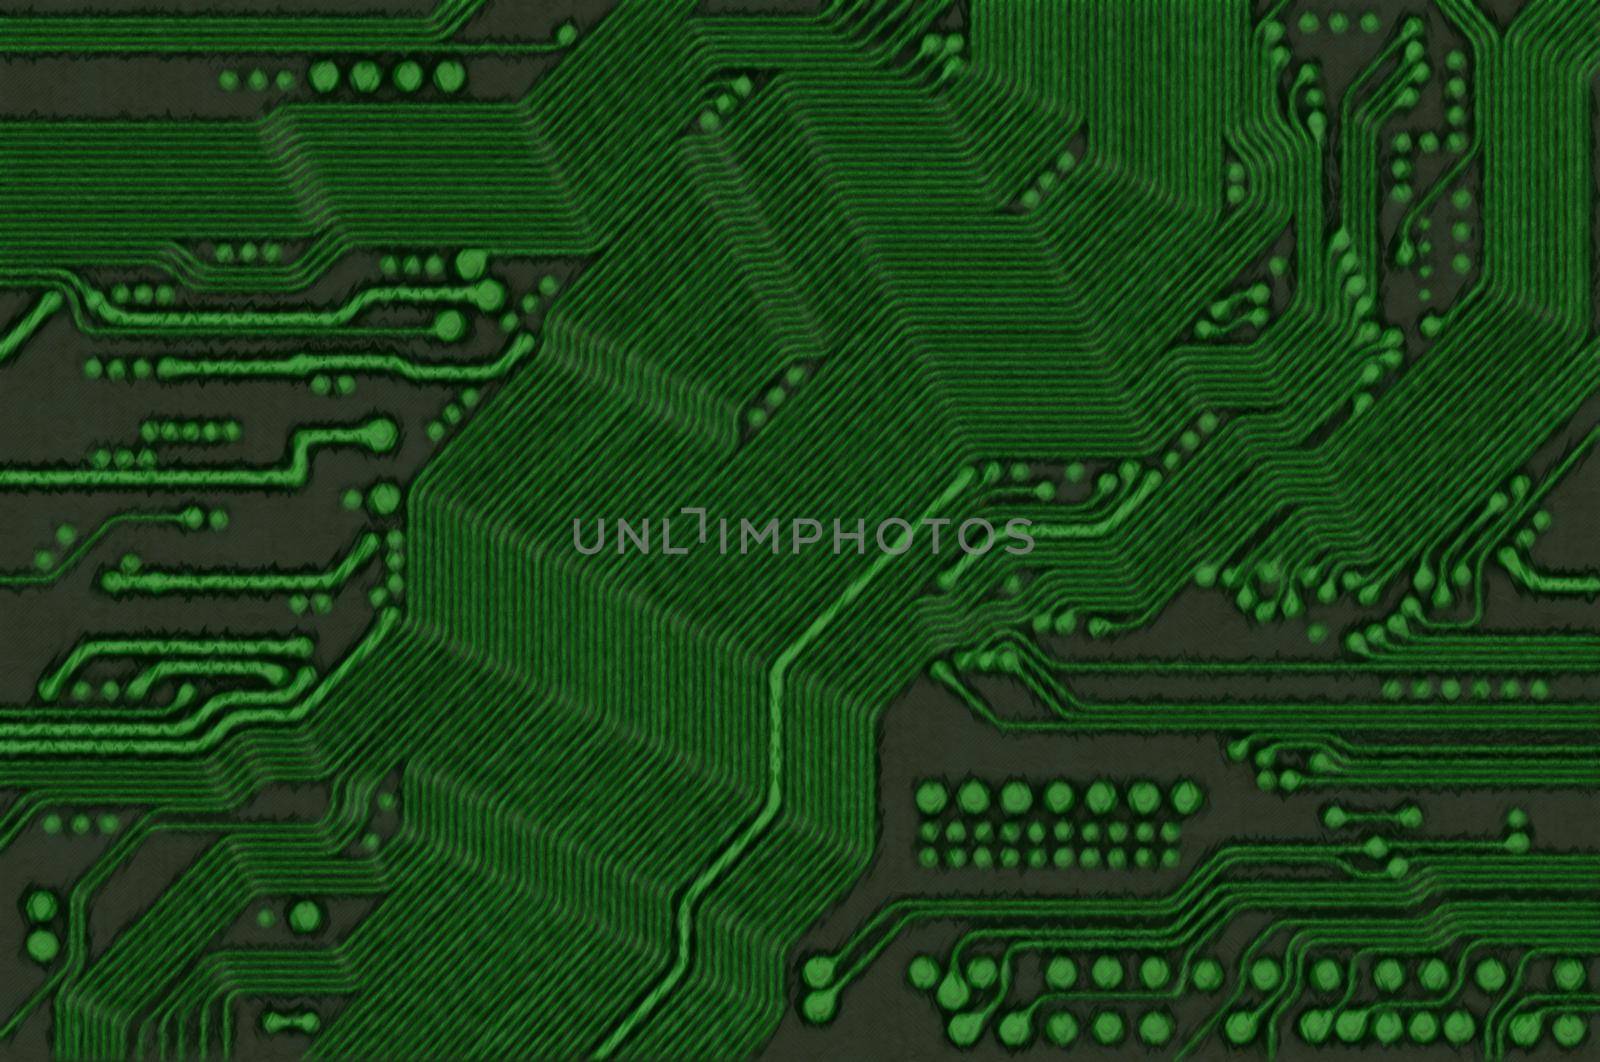 Printed circuit board by Mibuch